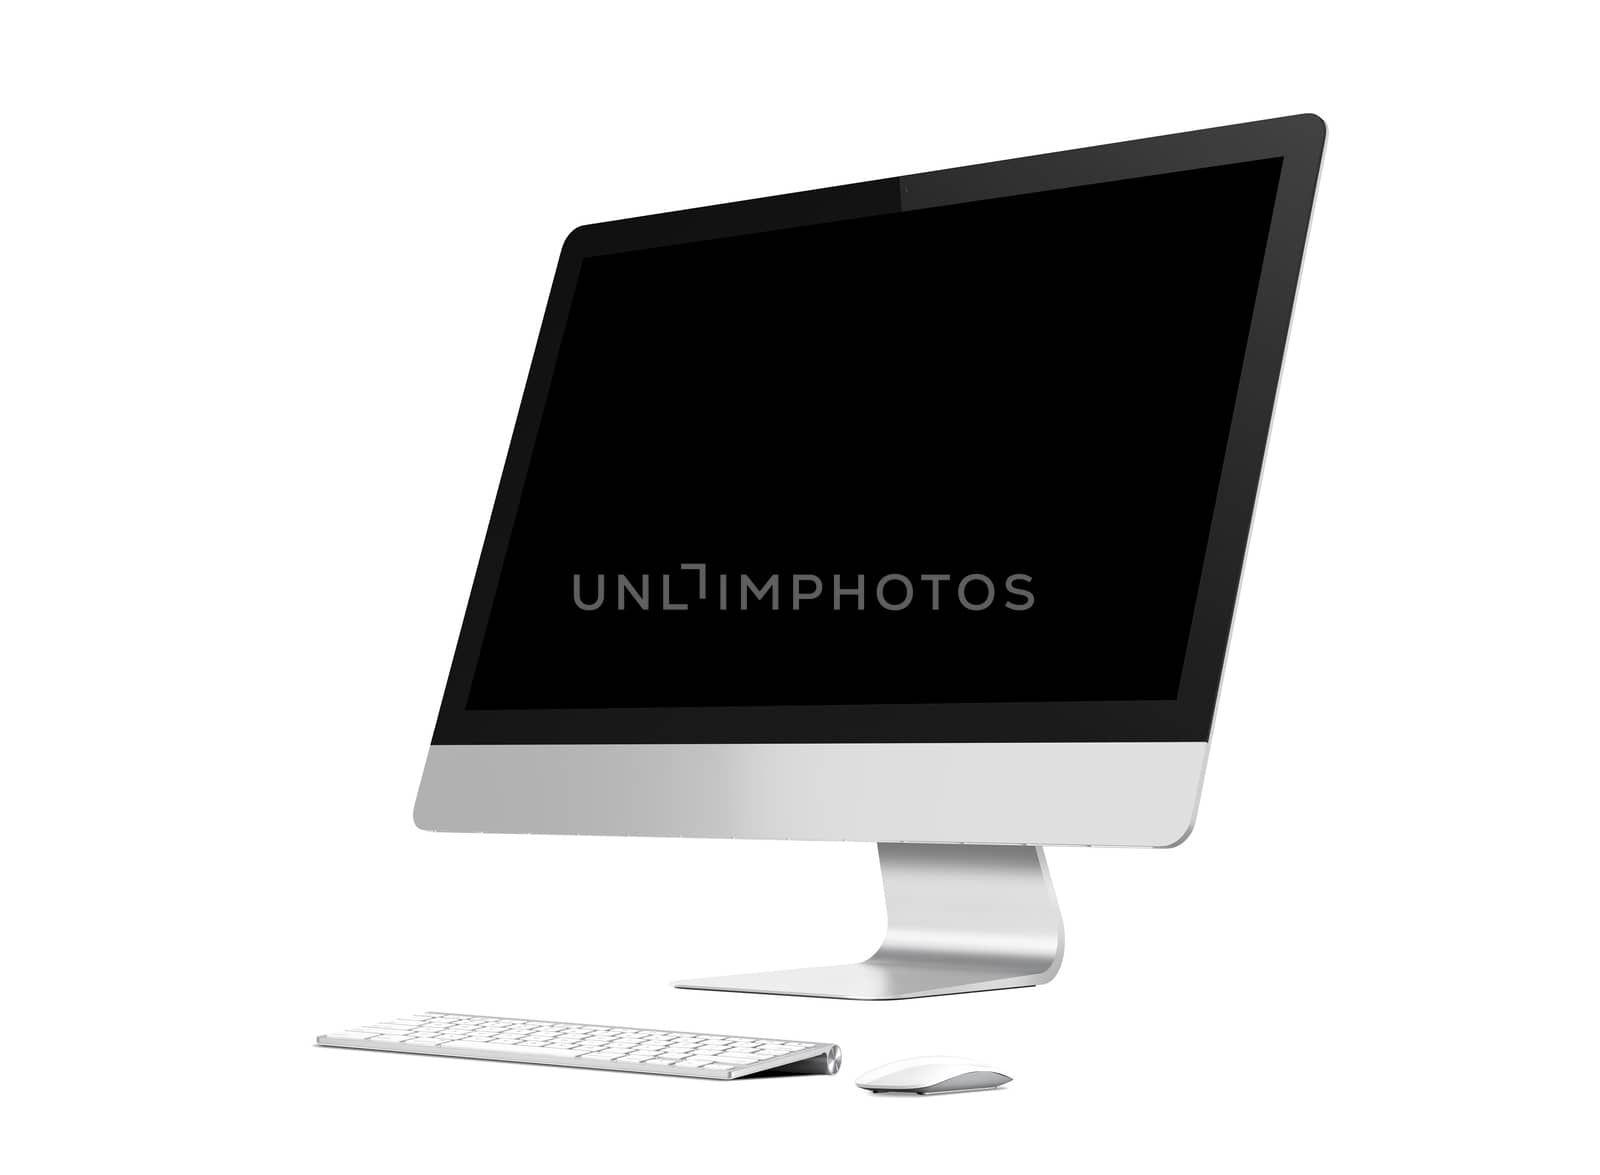 Isolated Computer, wireless keyboard and mouse on the white background mockup